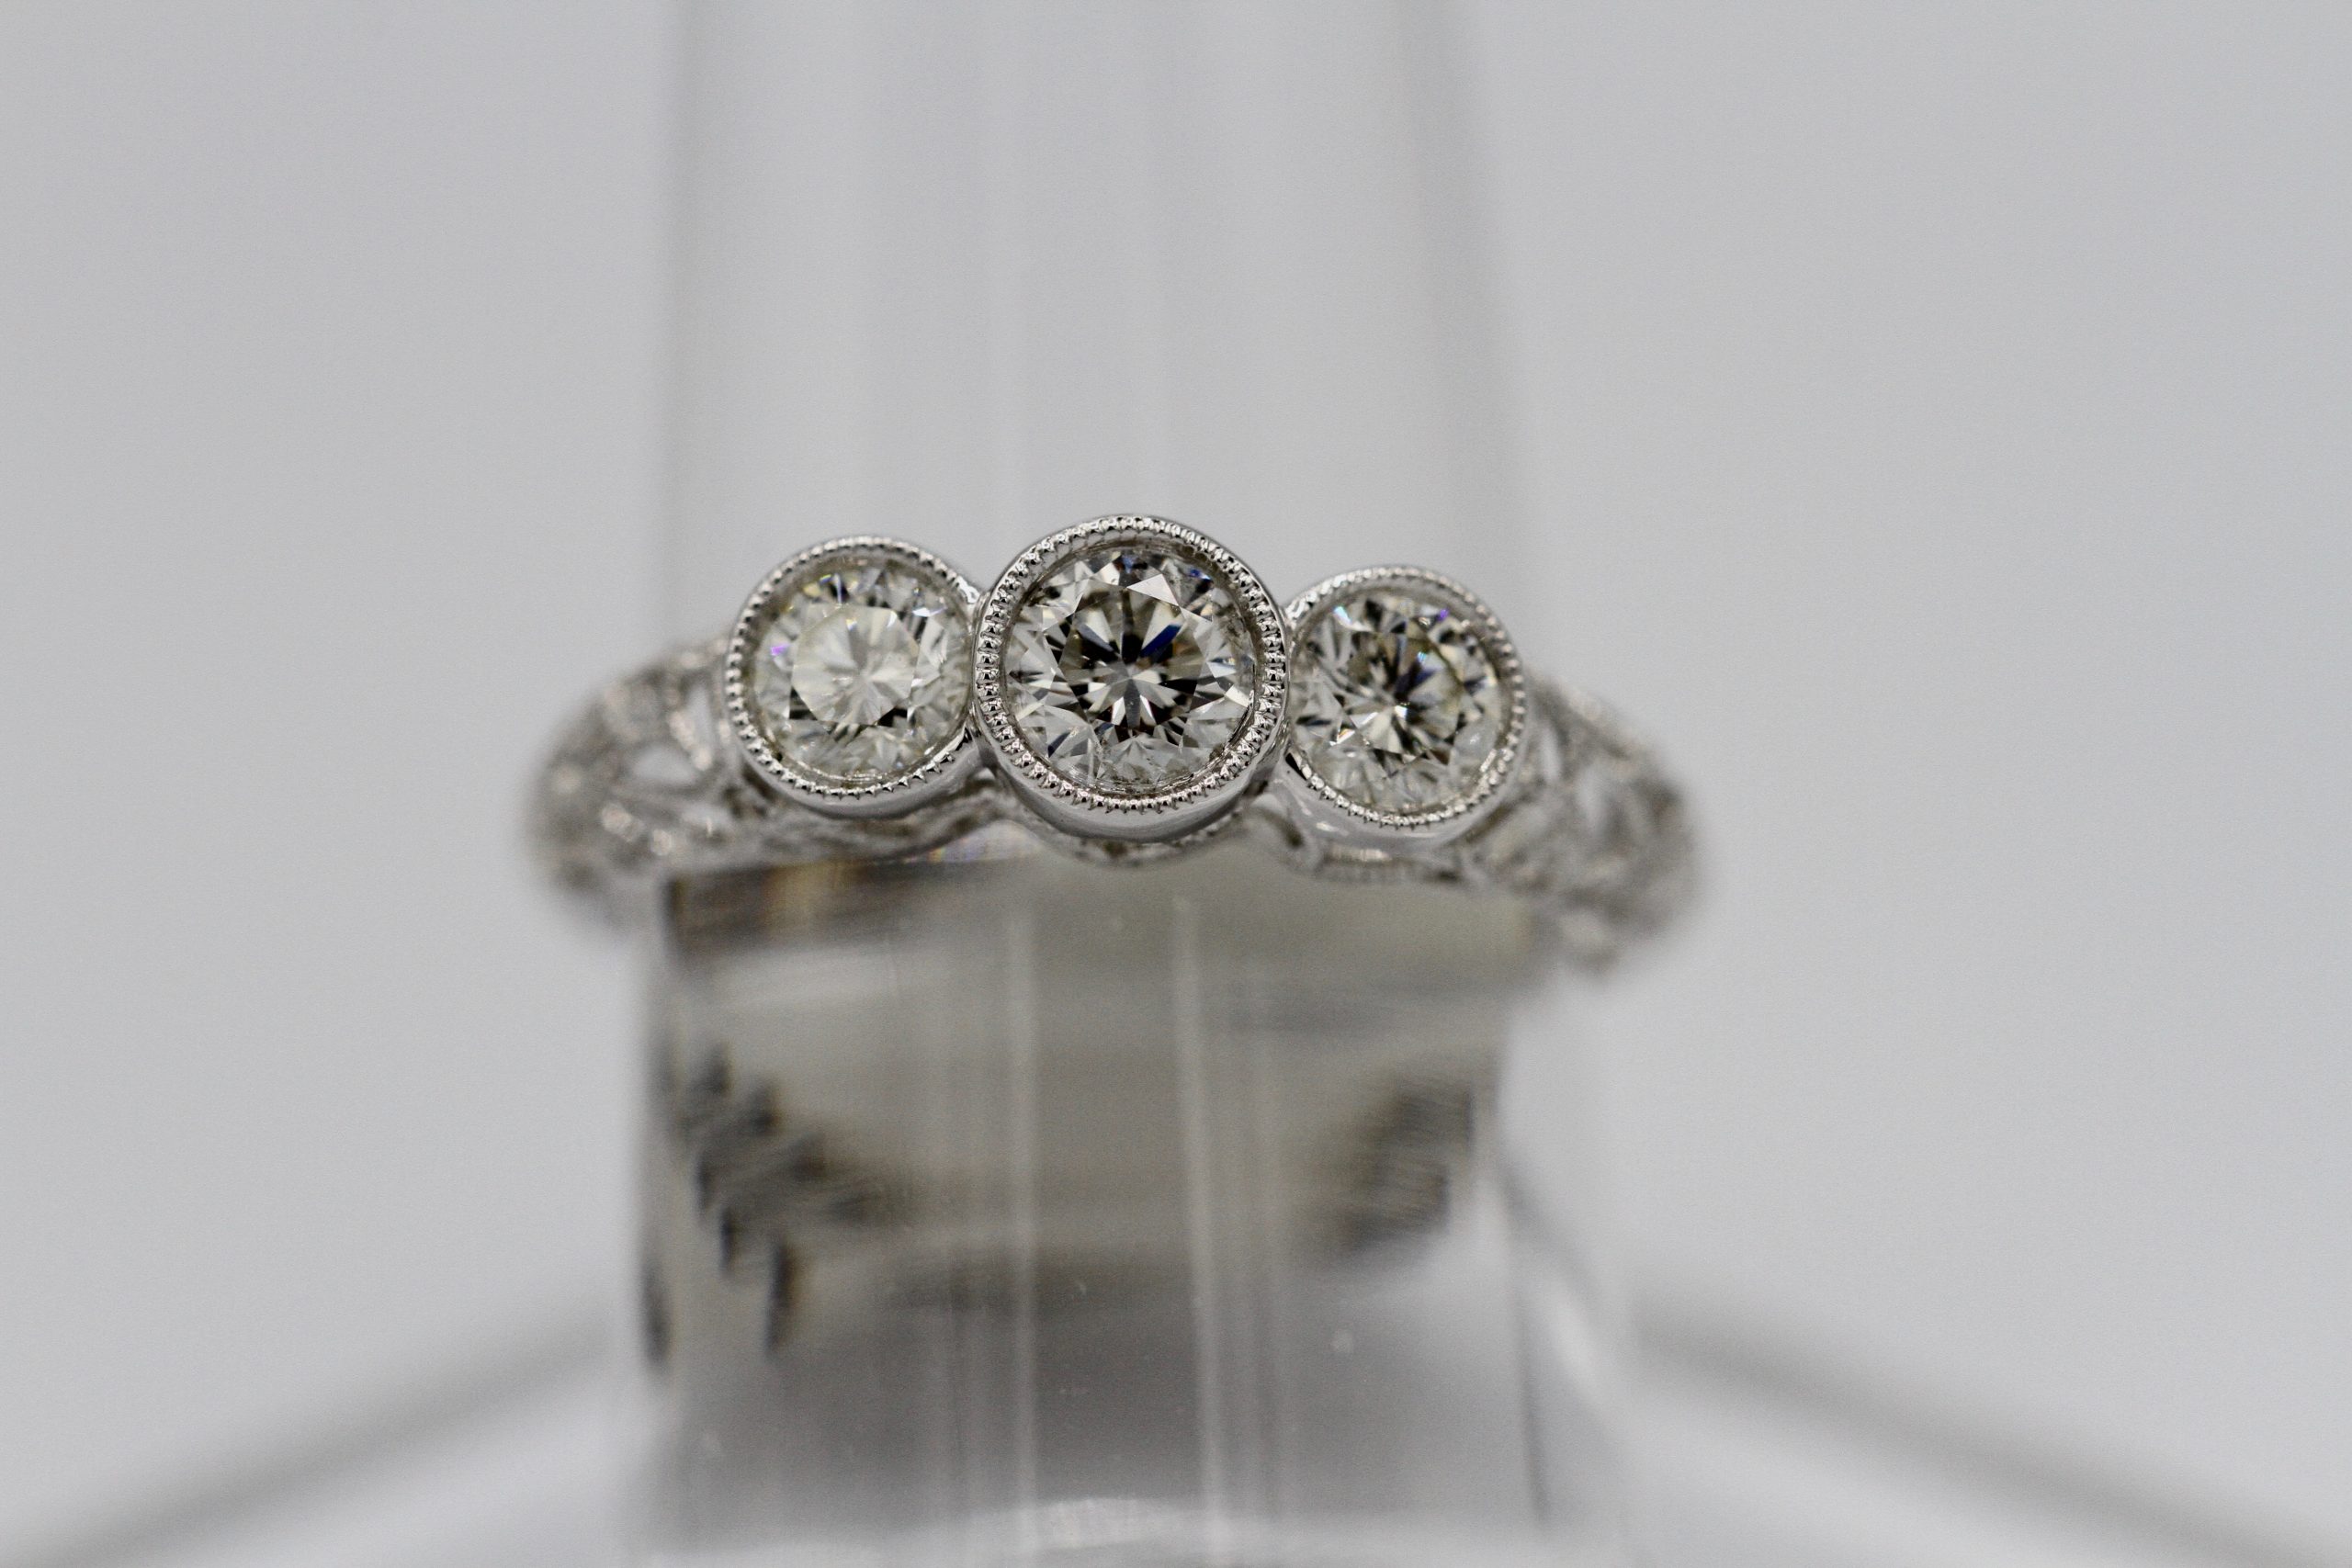 A silver ring with three large diamonds